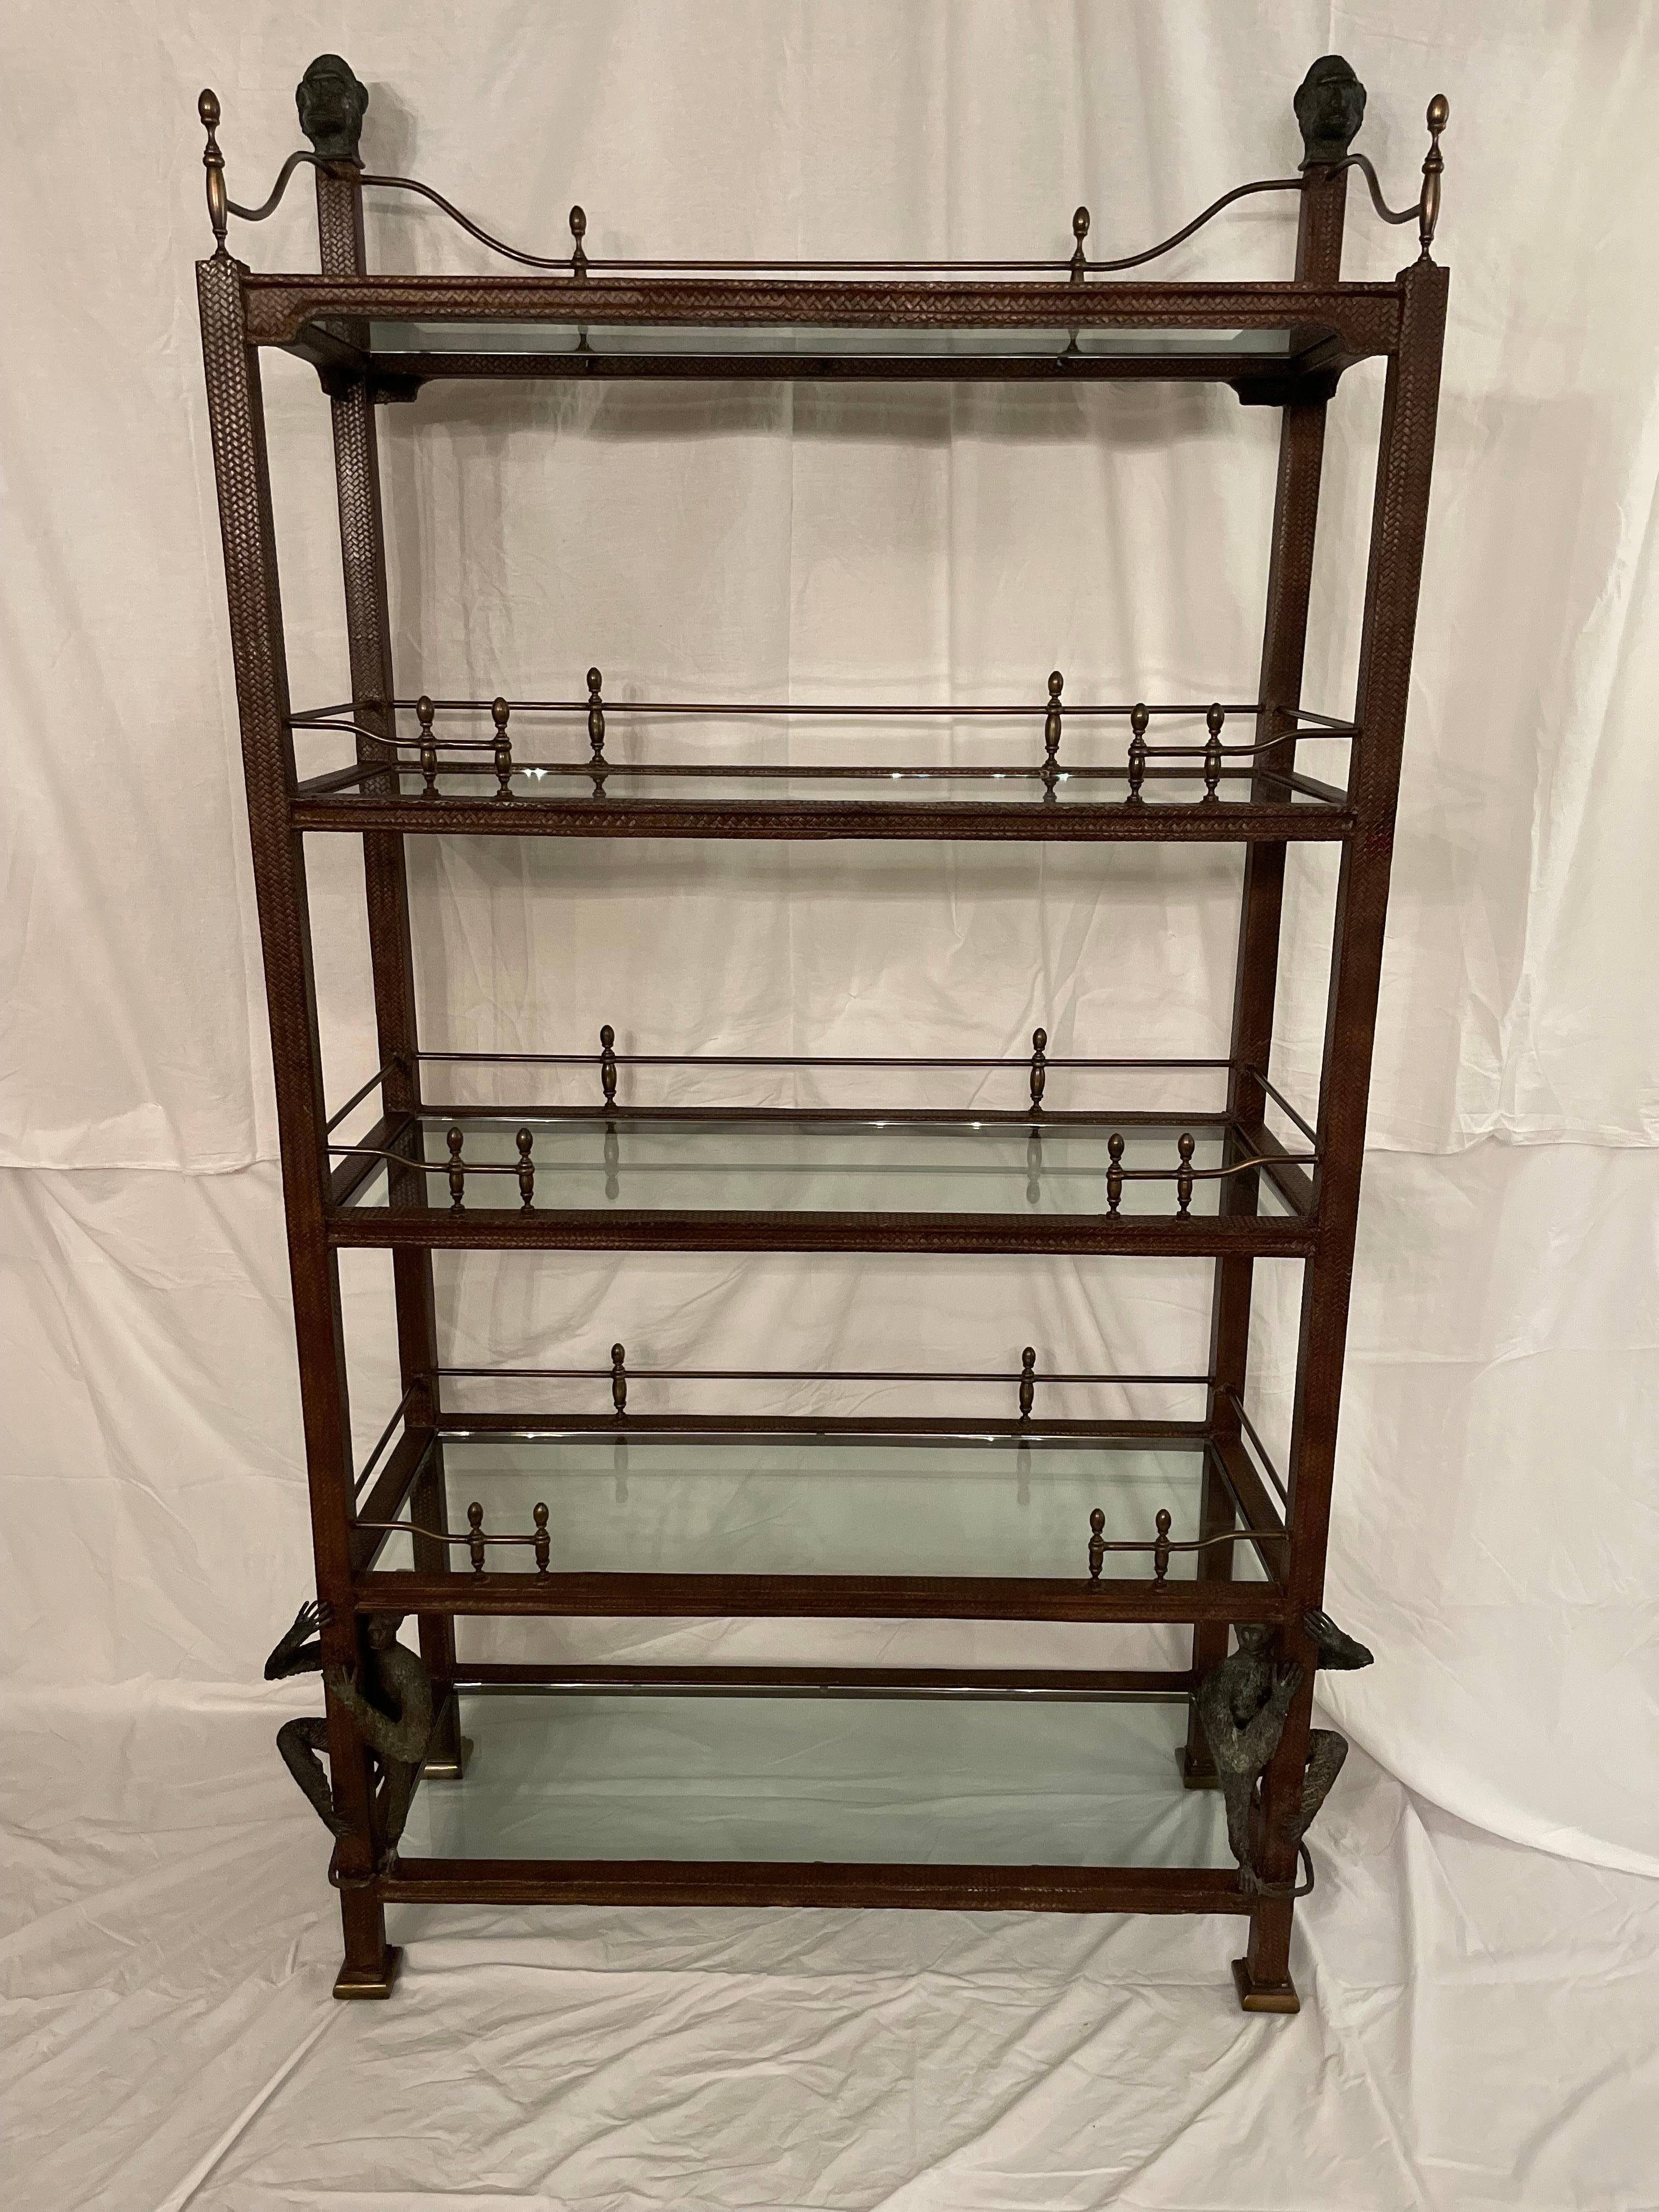 Maitland - Smith Regency Bookcase 5 Shelf Etagere Leather With Brass Rails Finia For Sale 11